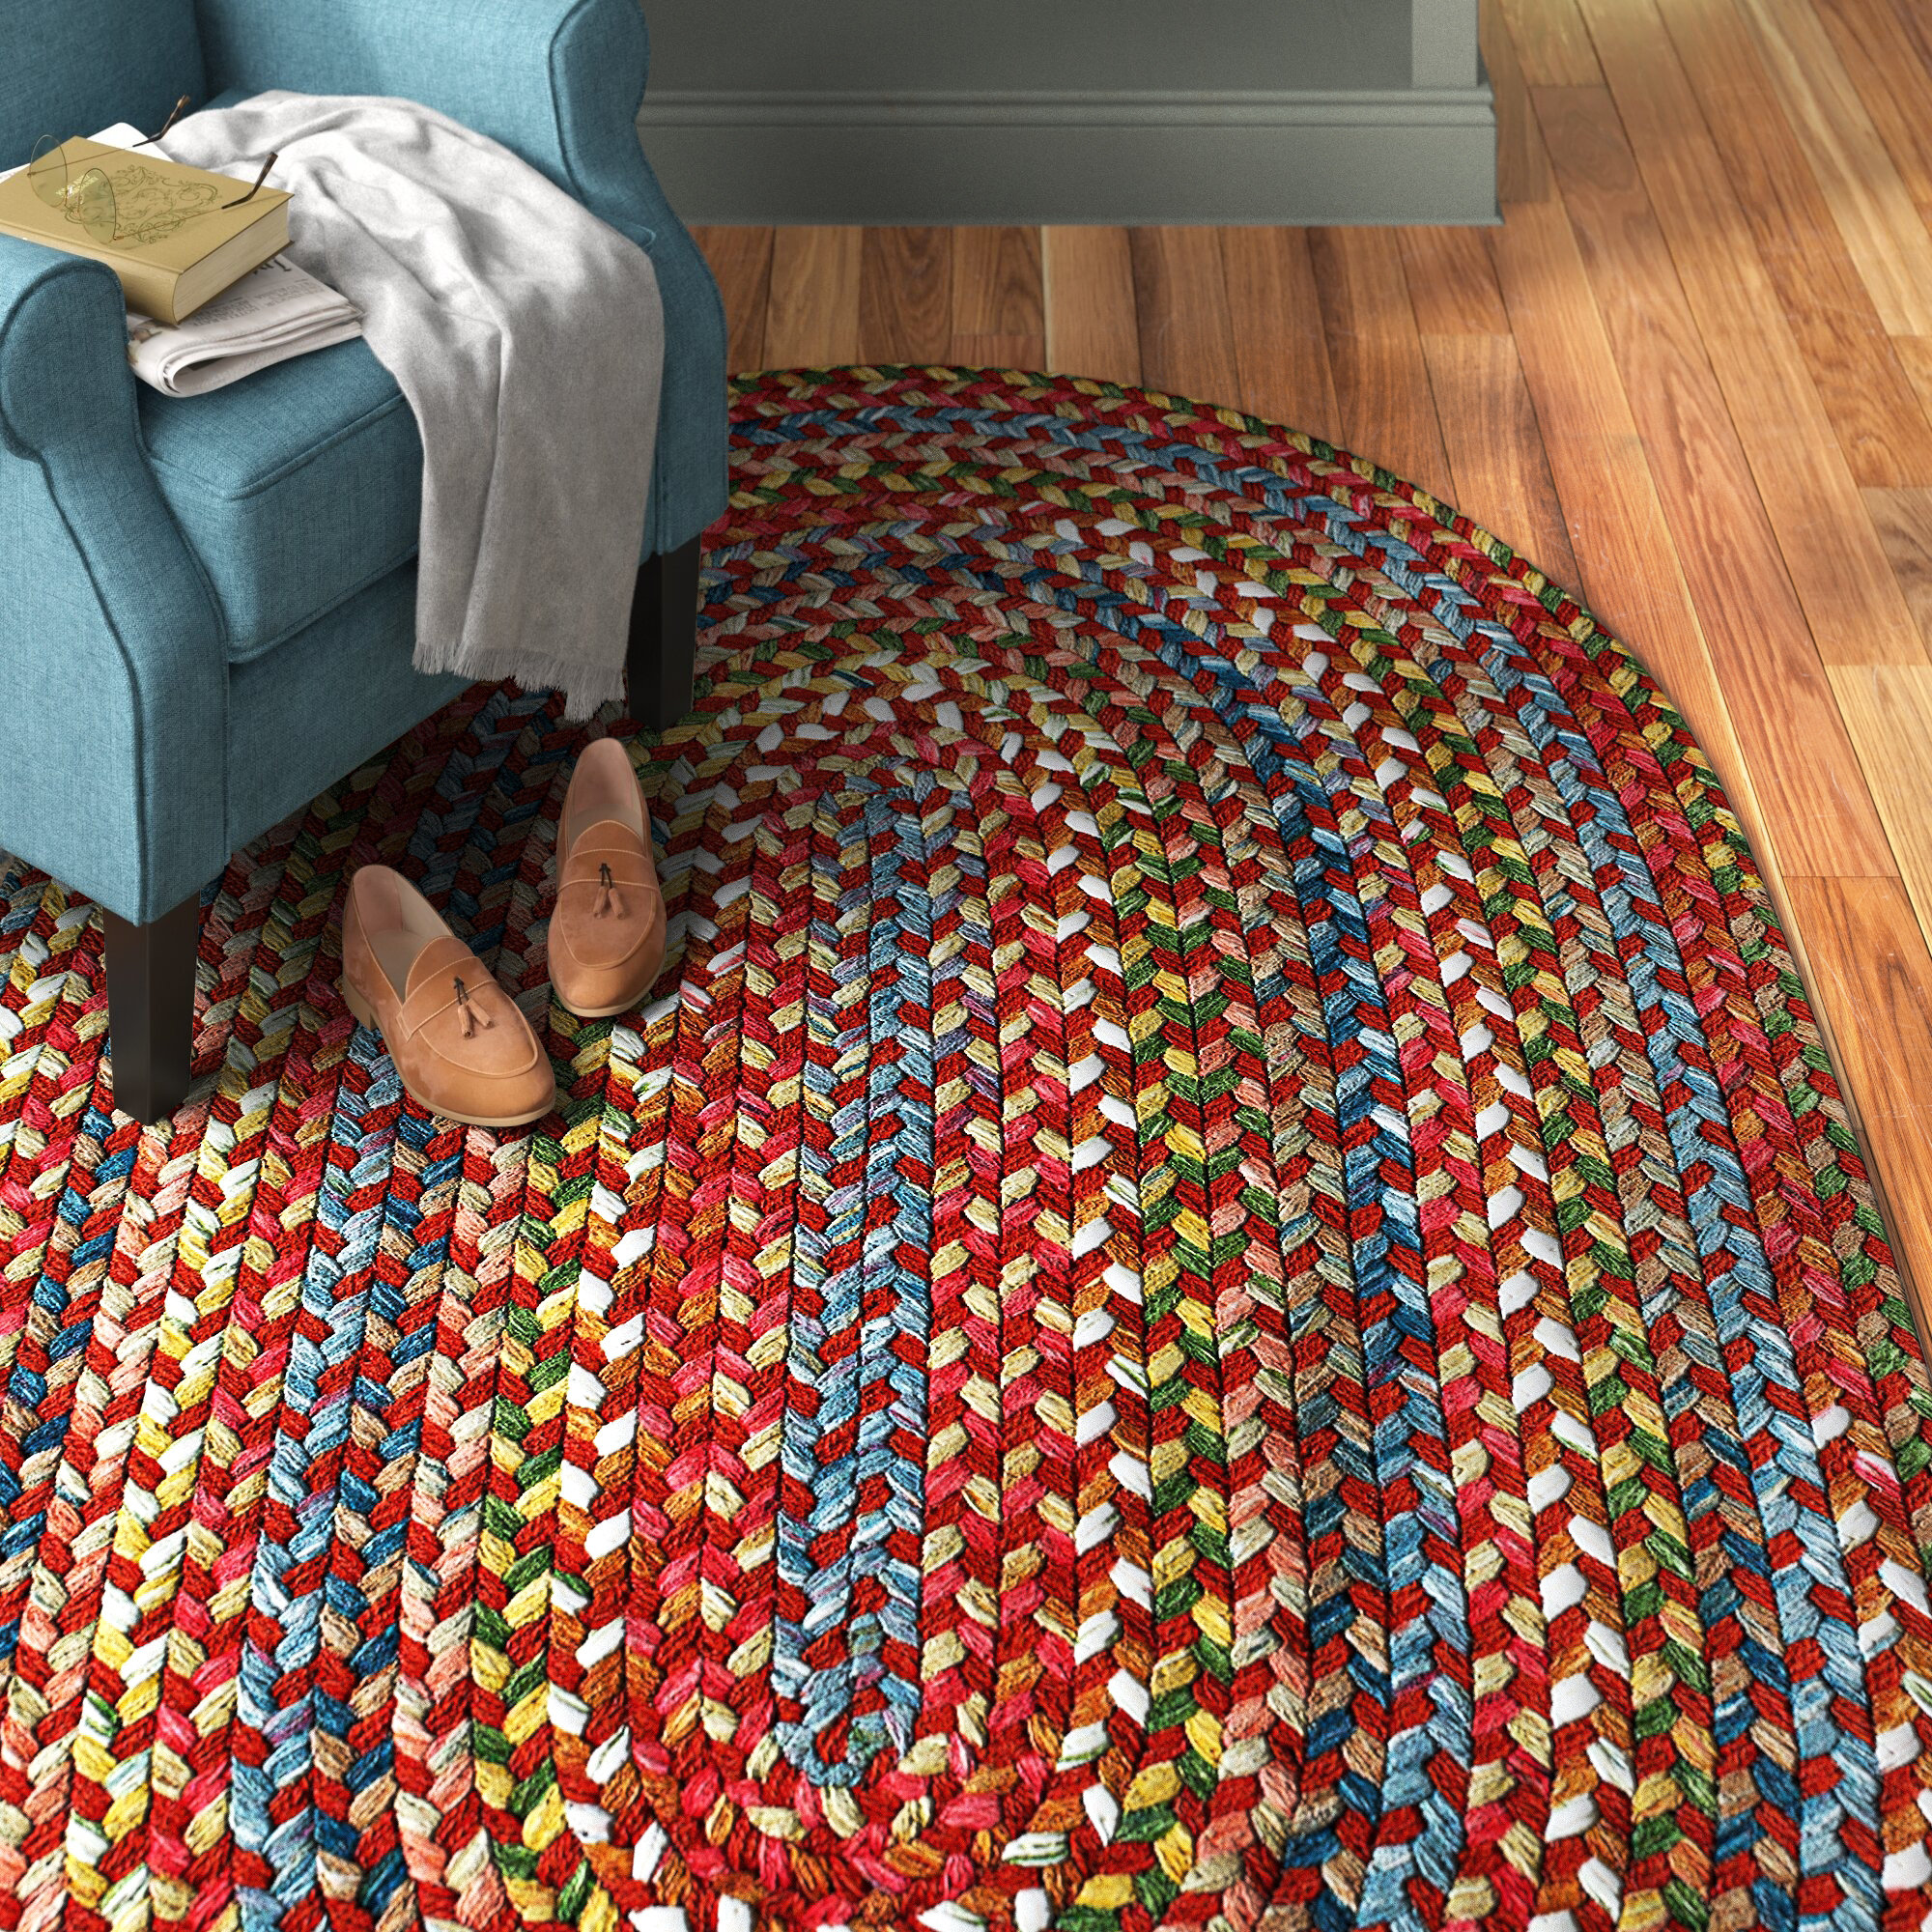 Will Make in Your Choice of Colors: 5 Foot by 7 Foot Braided Oval Rug 